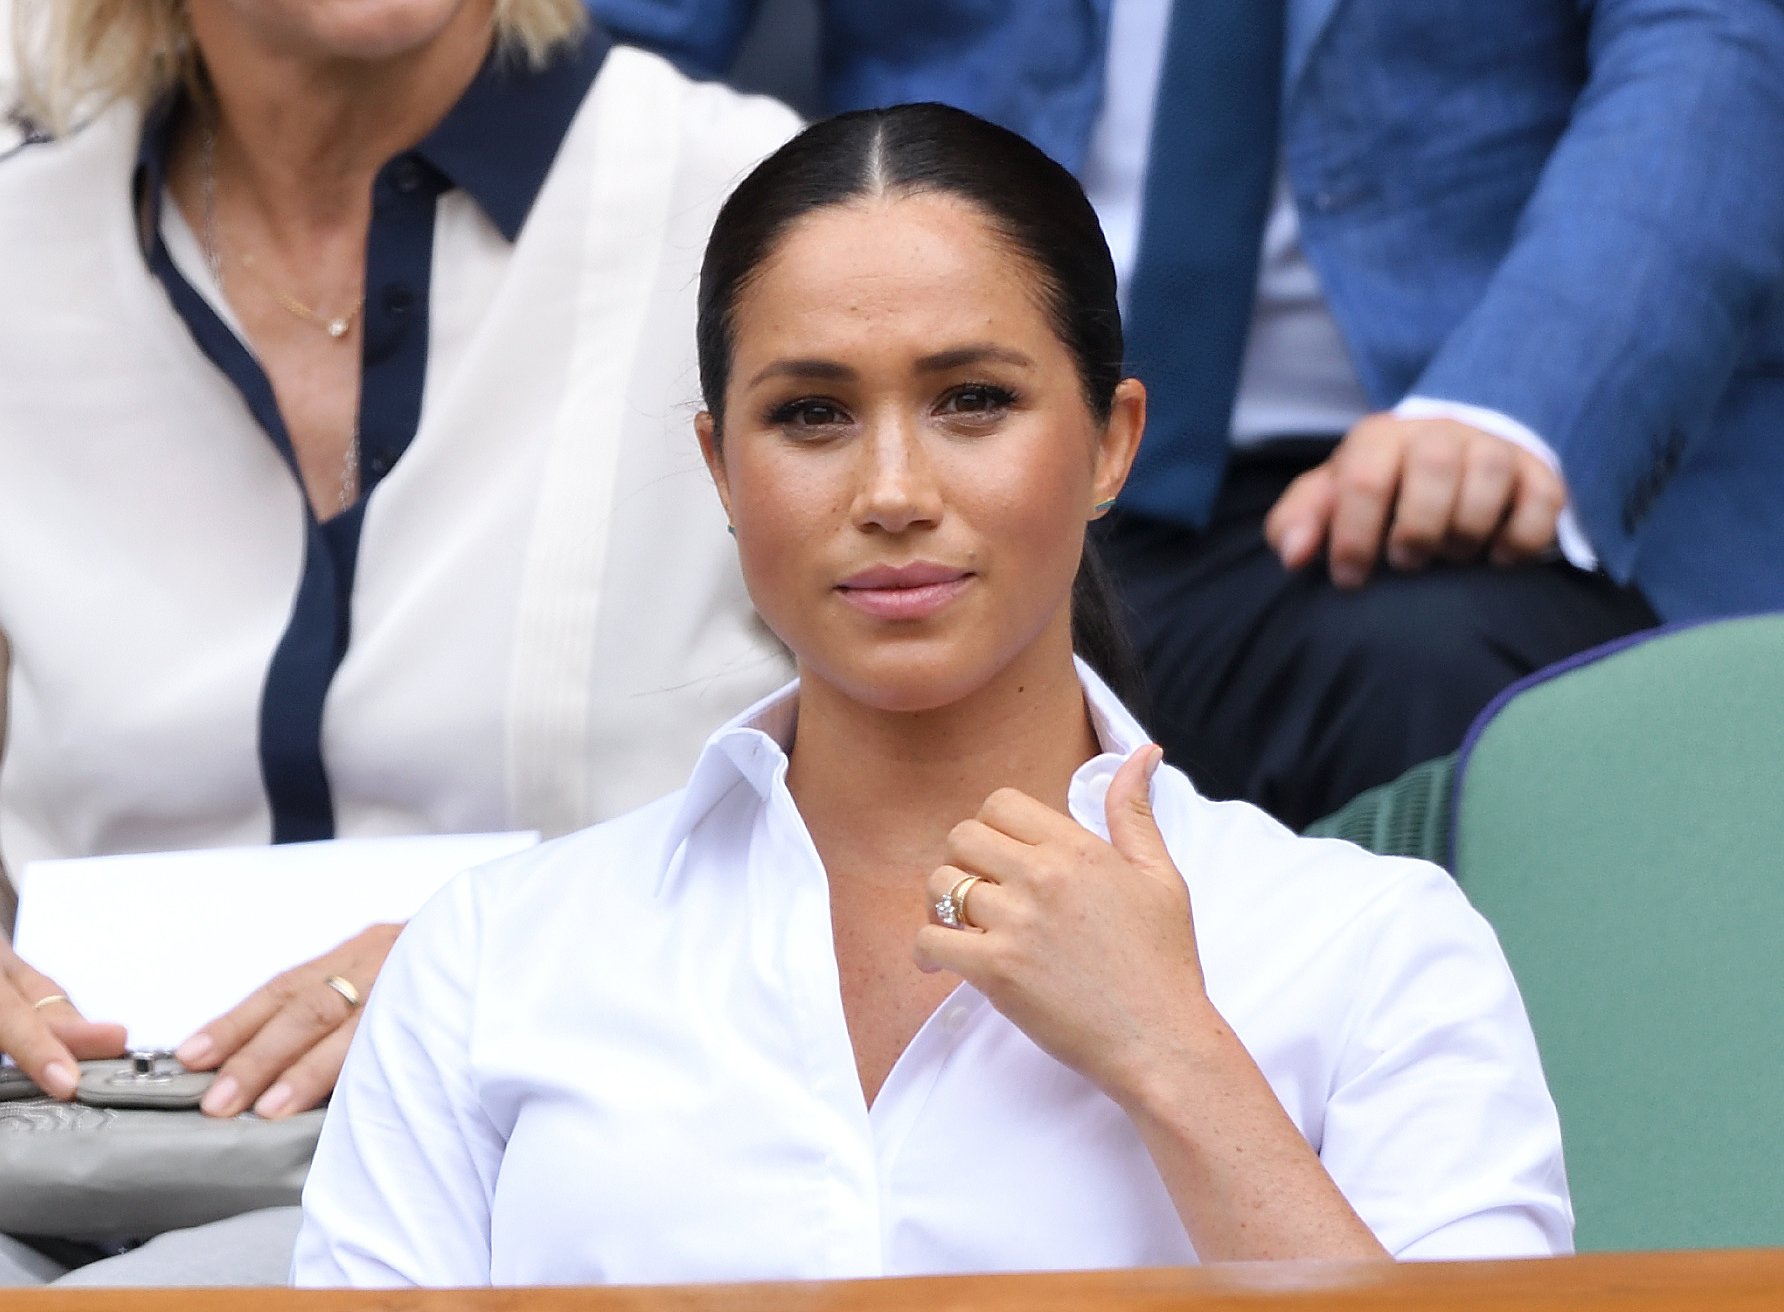 Meghan Markle attends a match for Wimbledon in July 2019 | Photo: Getty Images